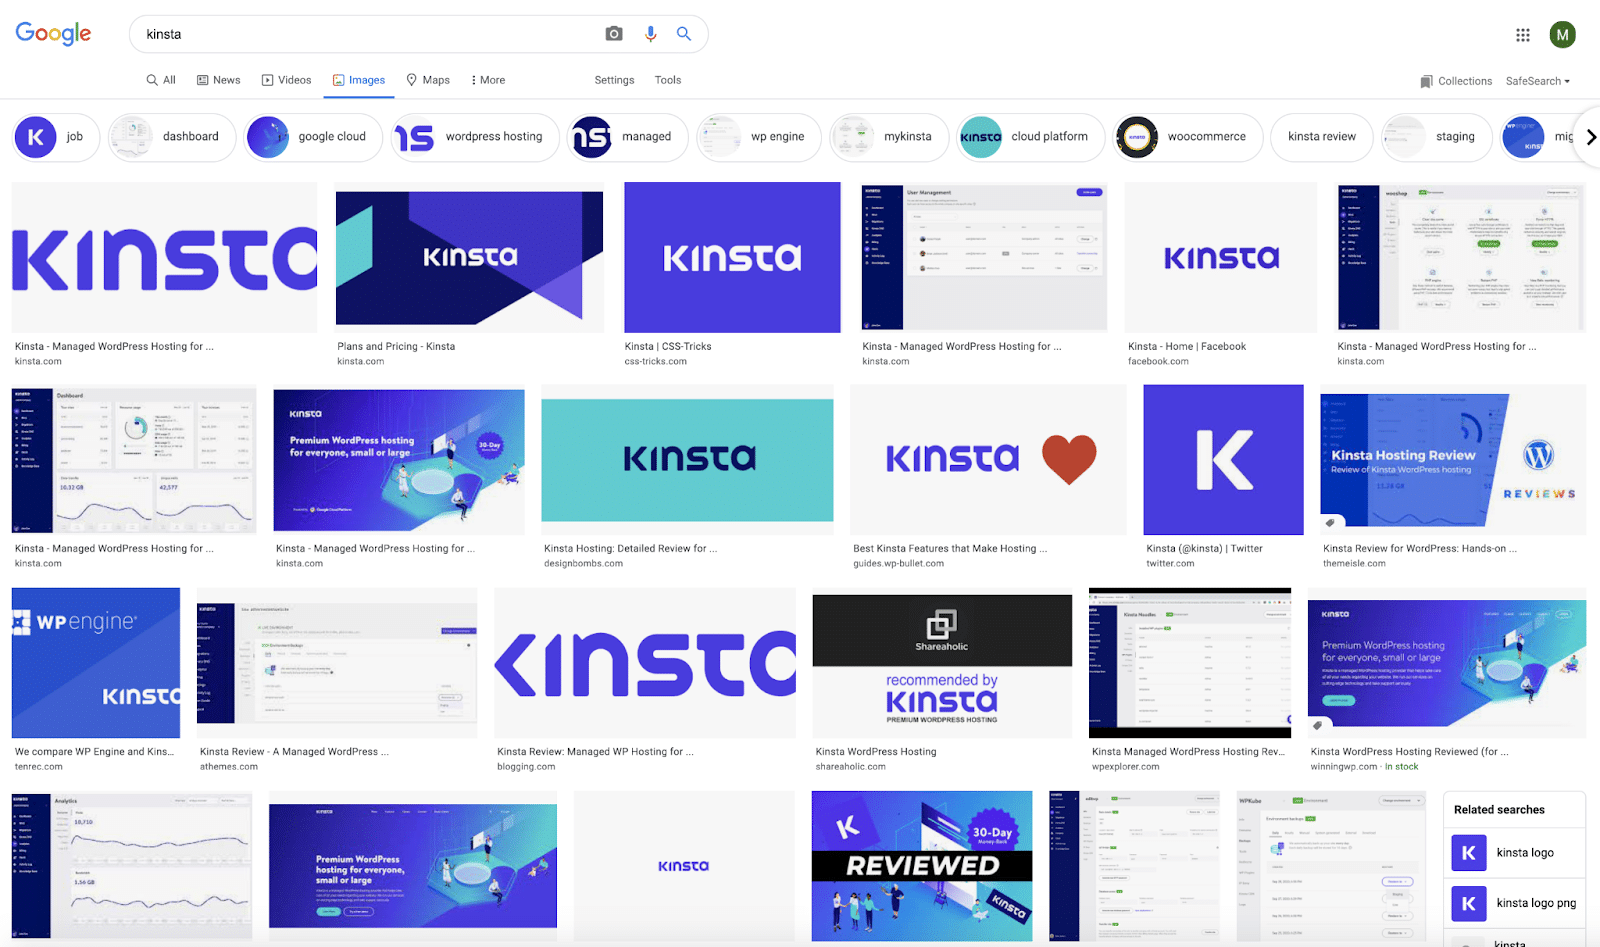 Image search results for Kinsta logo on Google.